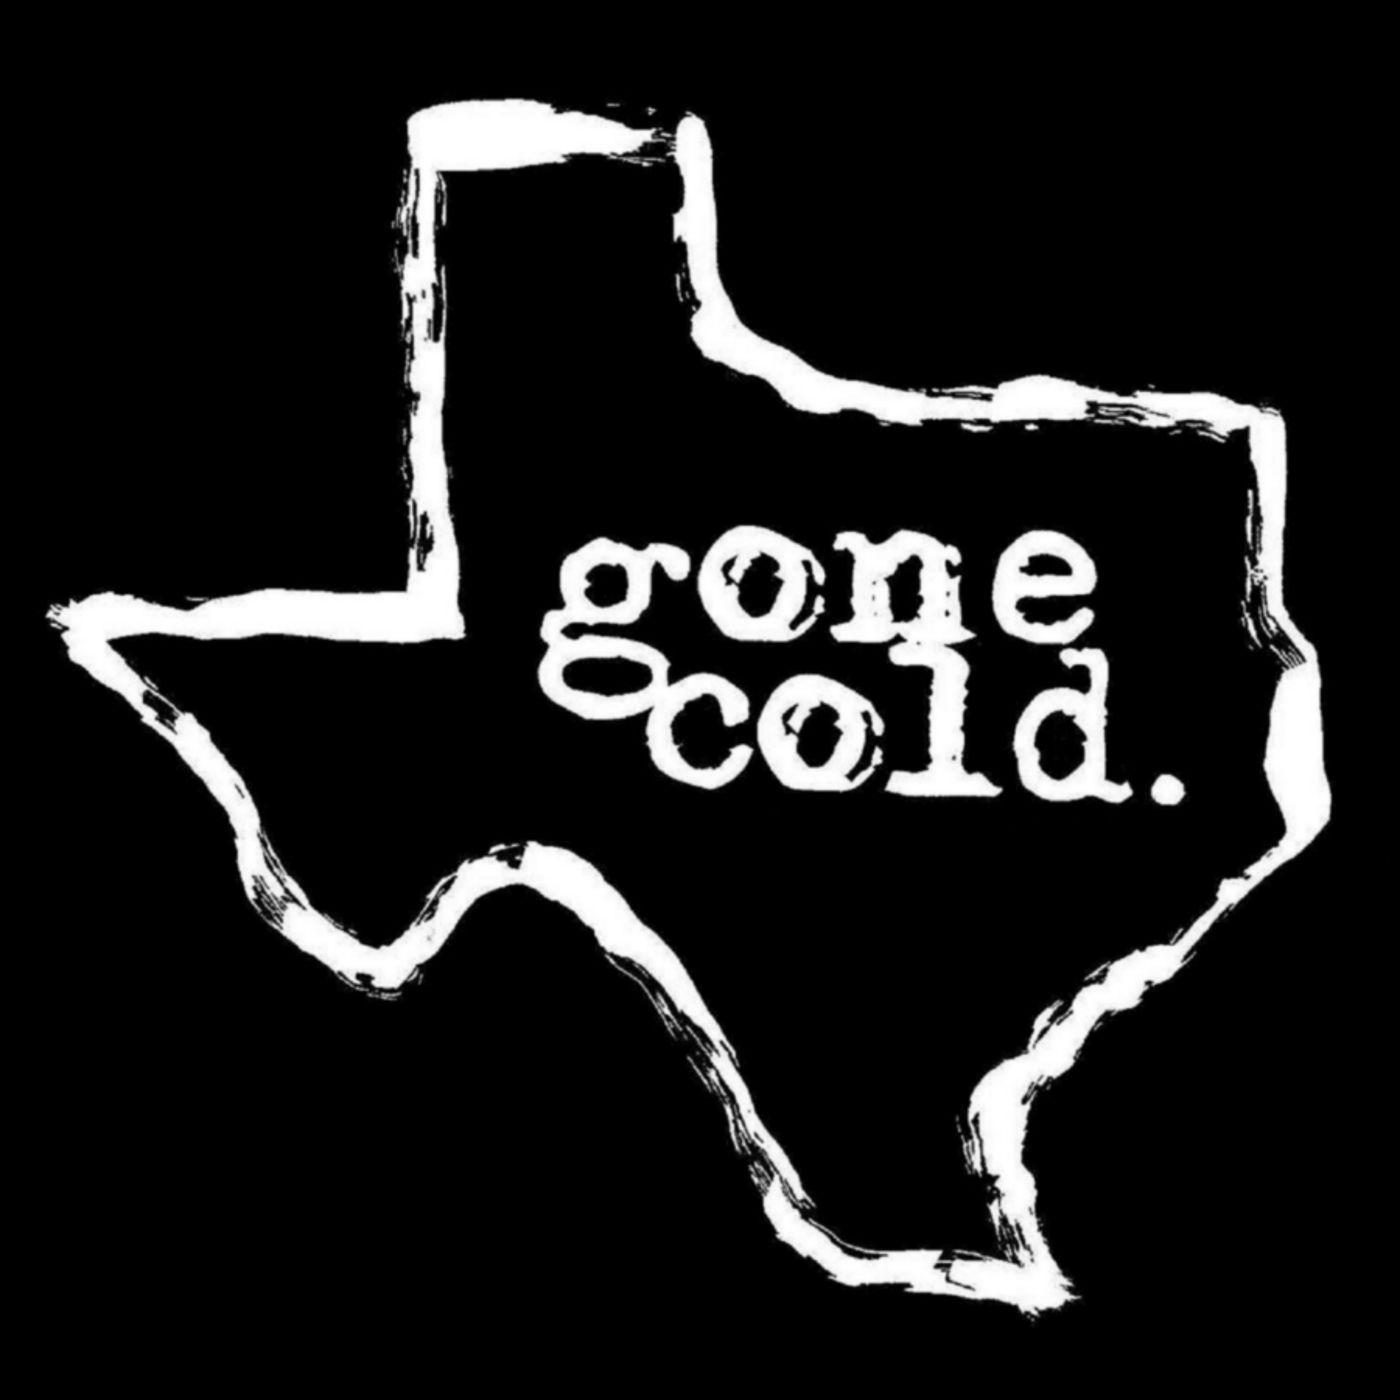 gone cold podcast - texas true crime